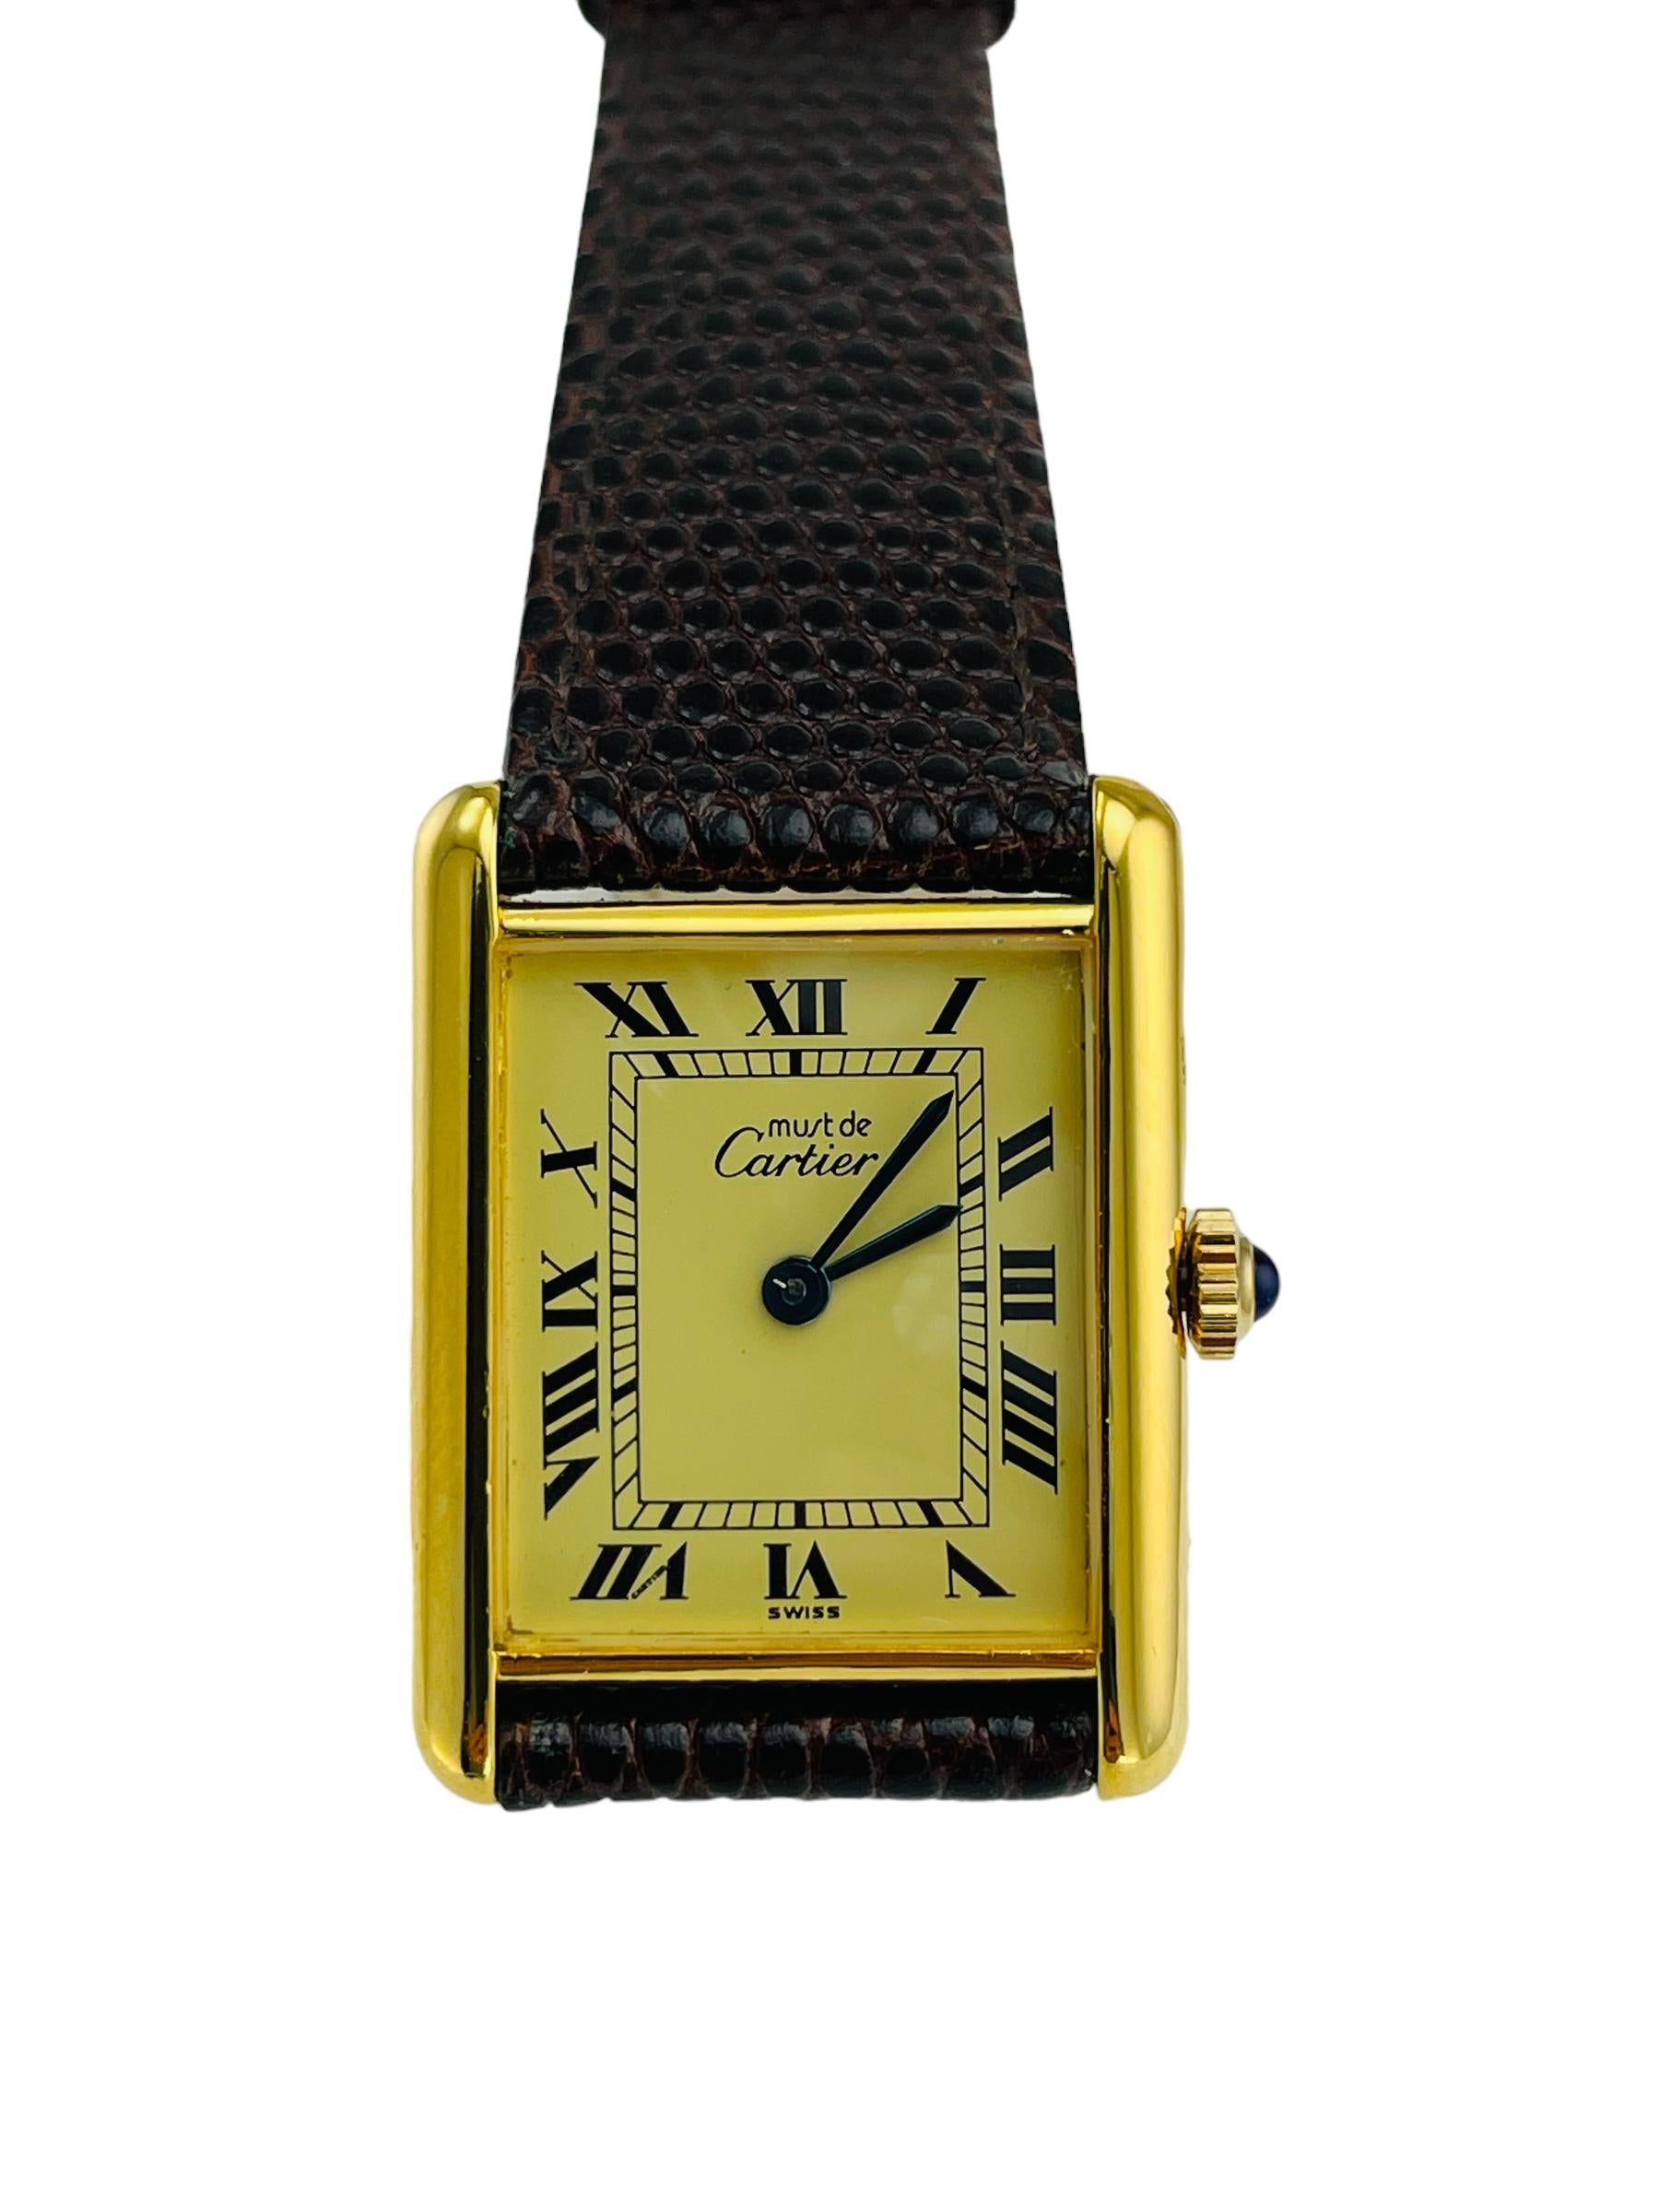 Must de Cartier tank quartz vermeil wristwatch circa 1980.

ABOUT THIS ITEM: #W-CJ1821. Scroll down for specifications. Like so many other Cartier wristwatch designs this large tank model has been and remains a favorite classic since its